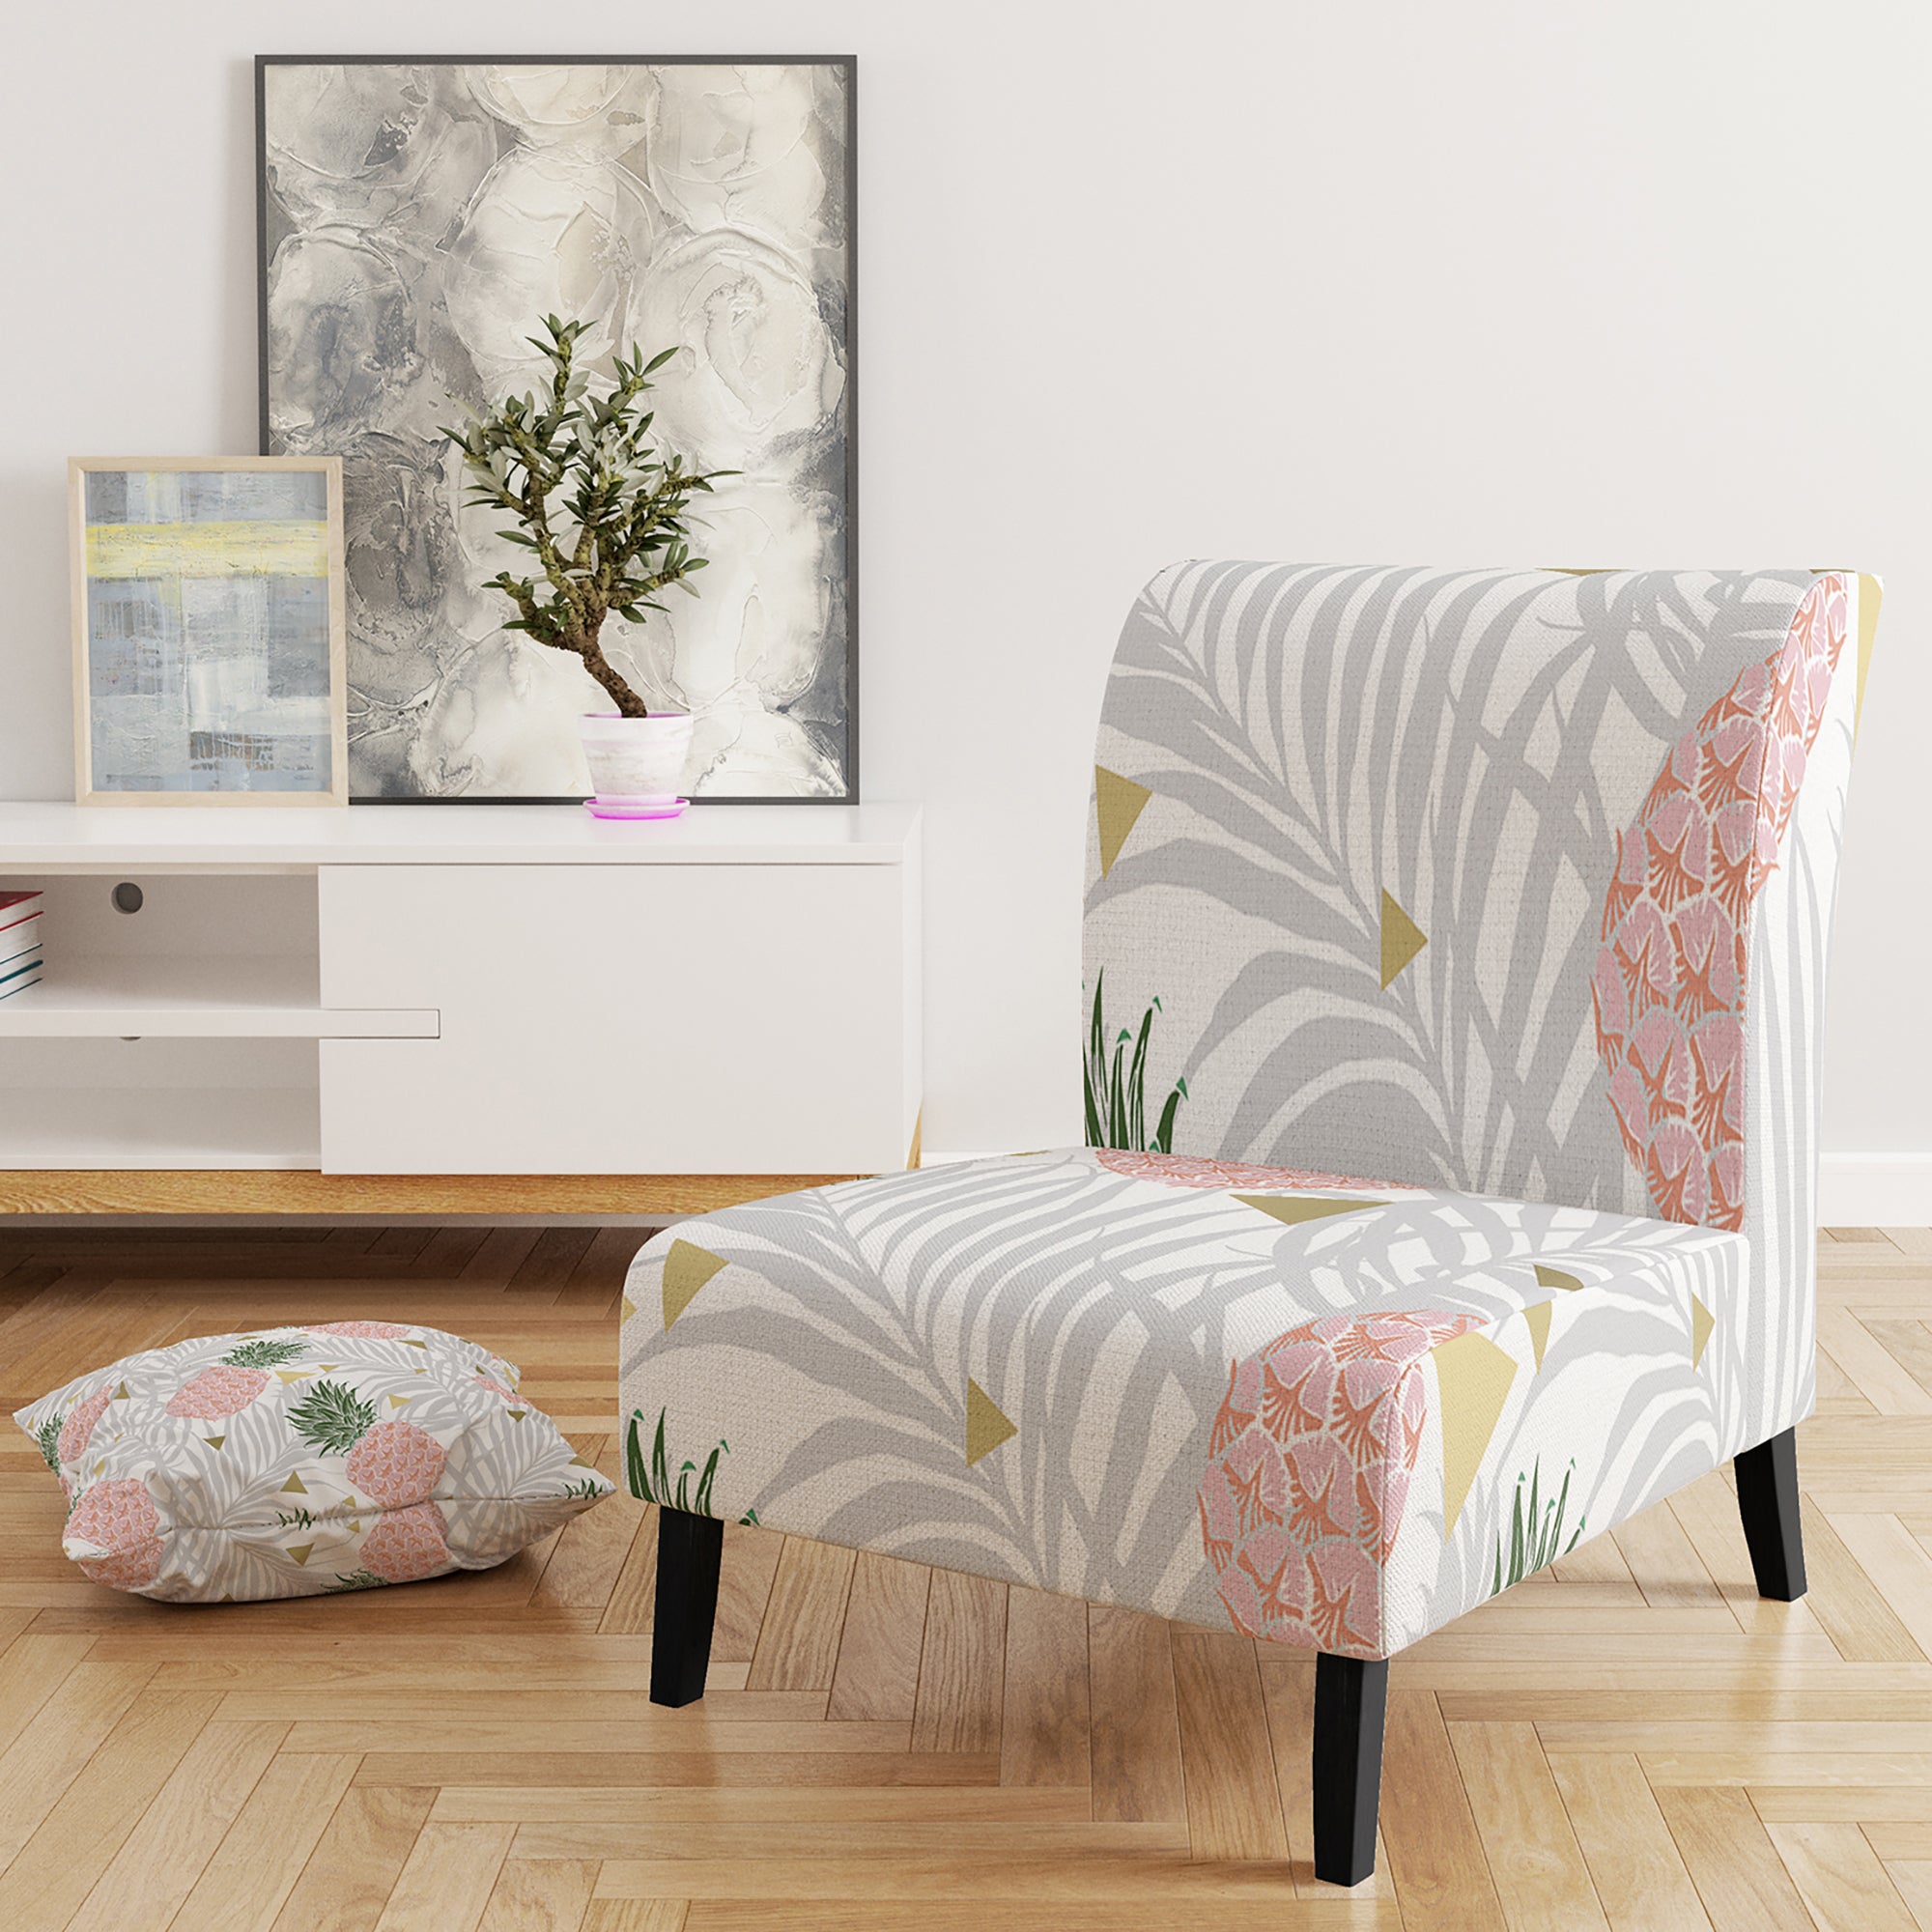 Pineappple On Tropical Leaves Mid-Century Accent Chair